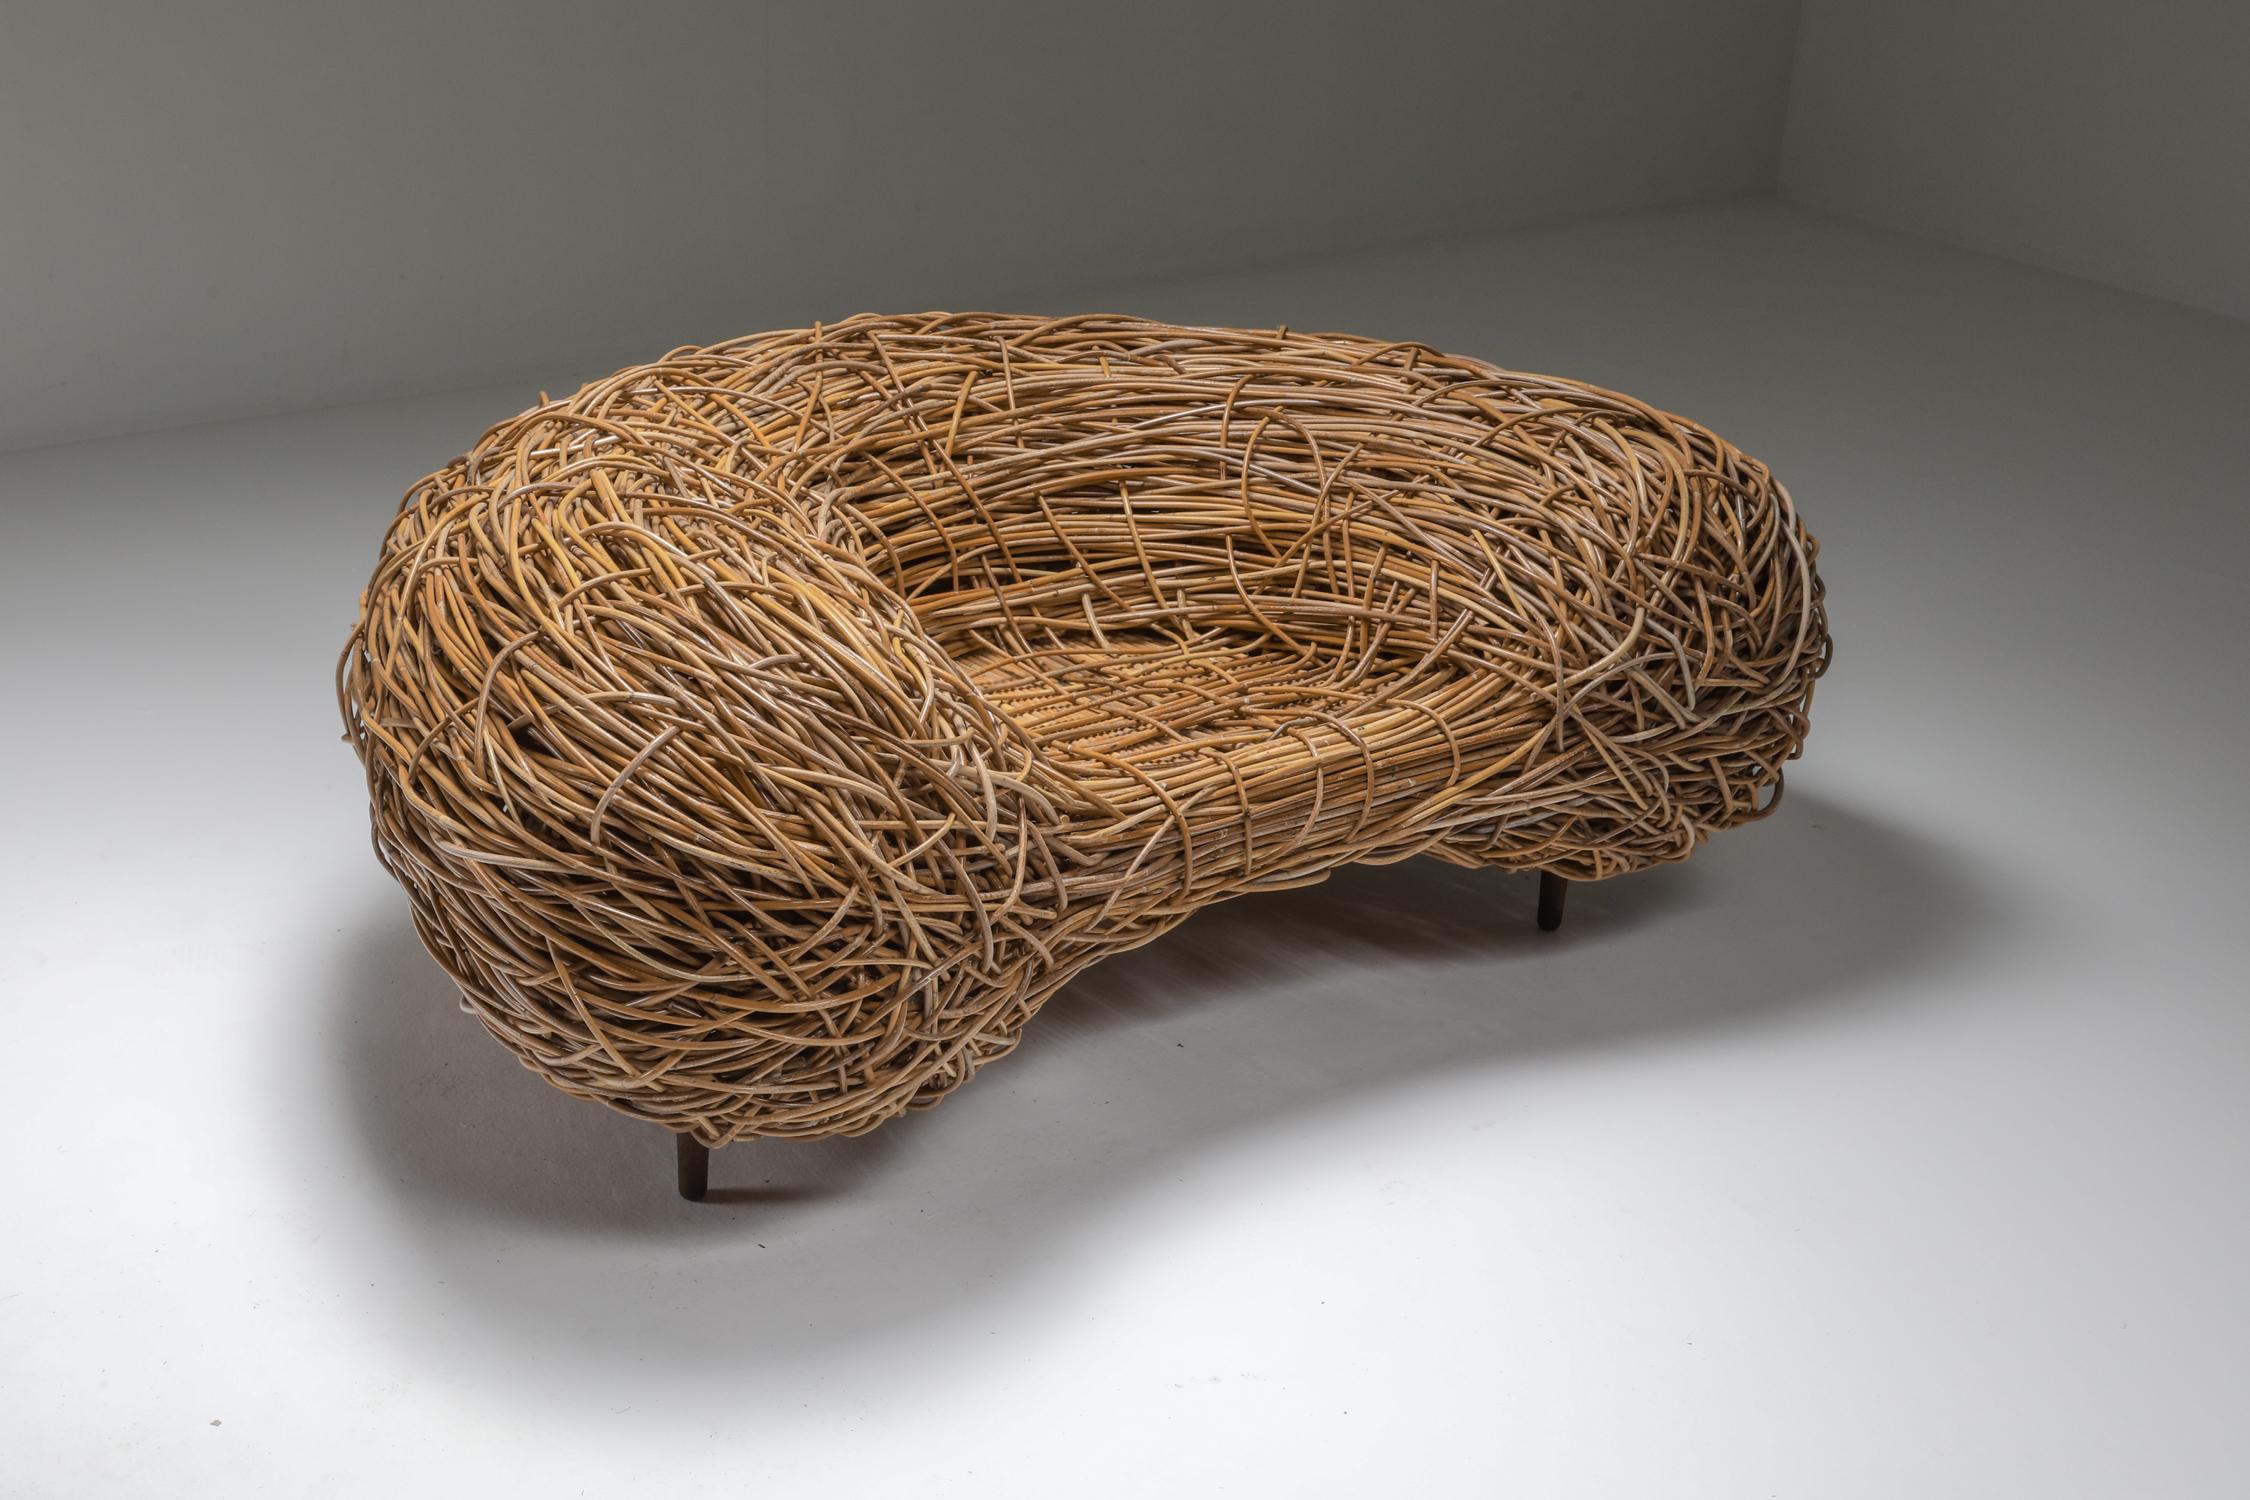 Bird's nest easy chair in rattan 

Attributed to artist designer Porky Hefer.
For South African designer Porky Hefer, architects and designers have much to learn from nature, in particular nests which have been inspiring the sculptural seating